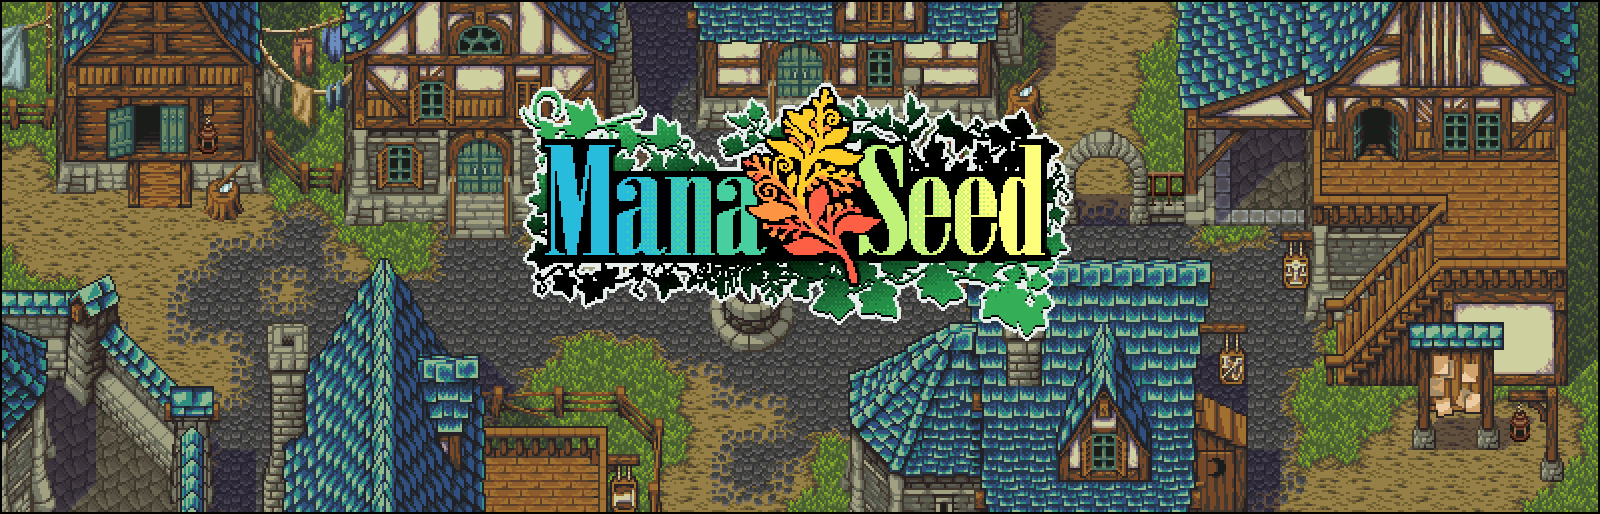 Free Pixel Art Character - The Mana Seed "Character Base"